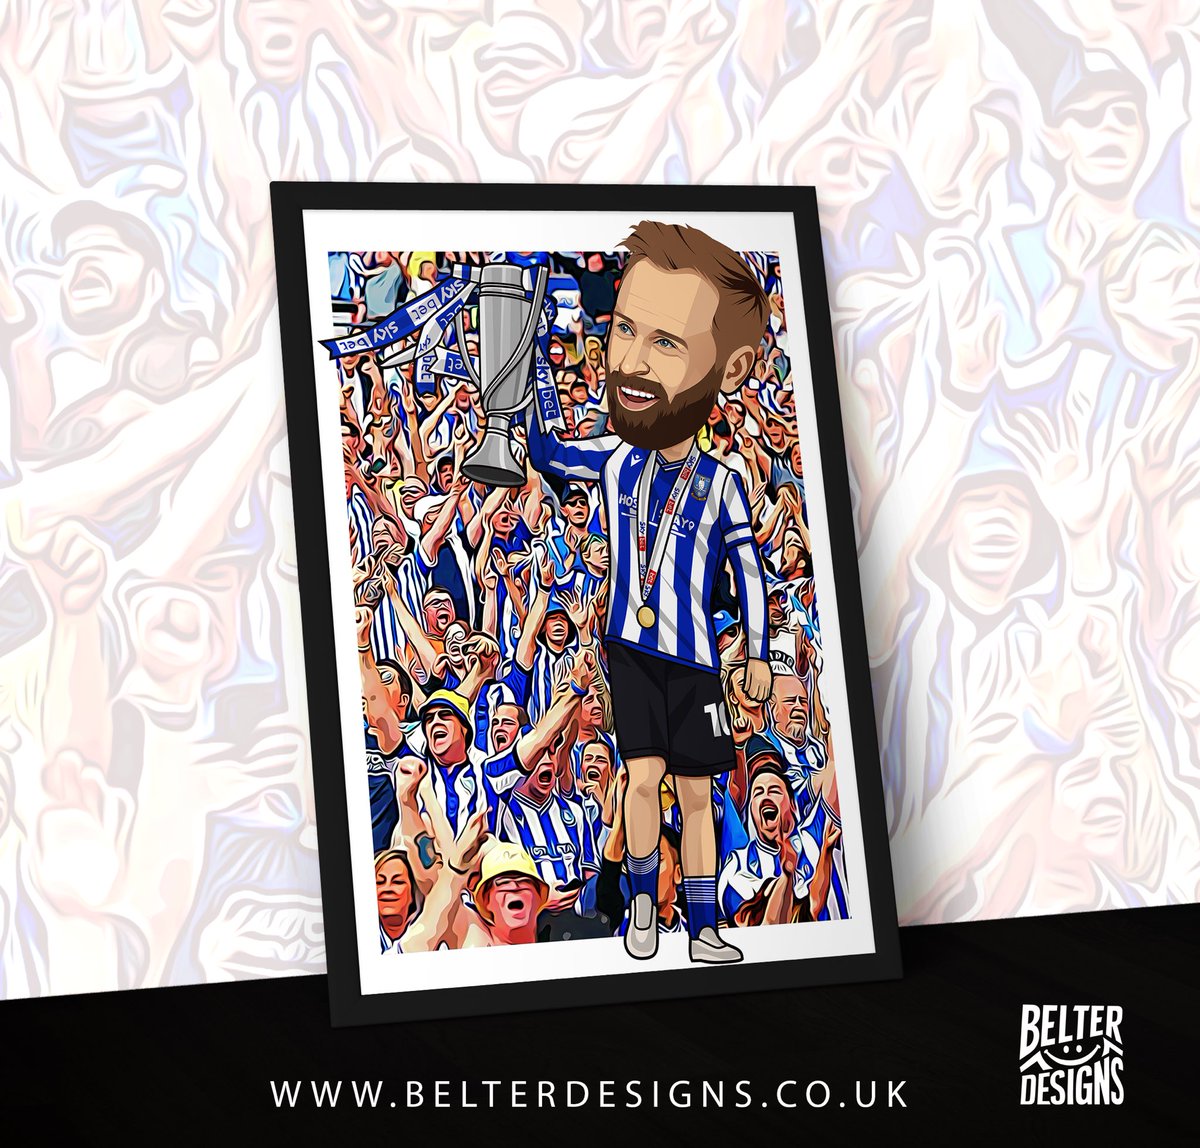 🔵⚪️🔵 🦉🦉🦉🔵⚪️🔵

You wanted the legend @bazzabannan25  next Wednesday fans!

Here you go !! 

RTs, likes and follows appreciated. 

Order your print here 

belterdesigns.co.uk/shop/Barry-Ban…

#swfc #wawaw

🔵⚪️🔵🦉🦉🦉🔵⚪️🔵